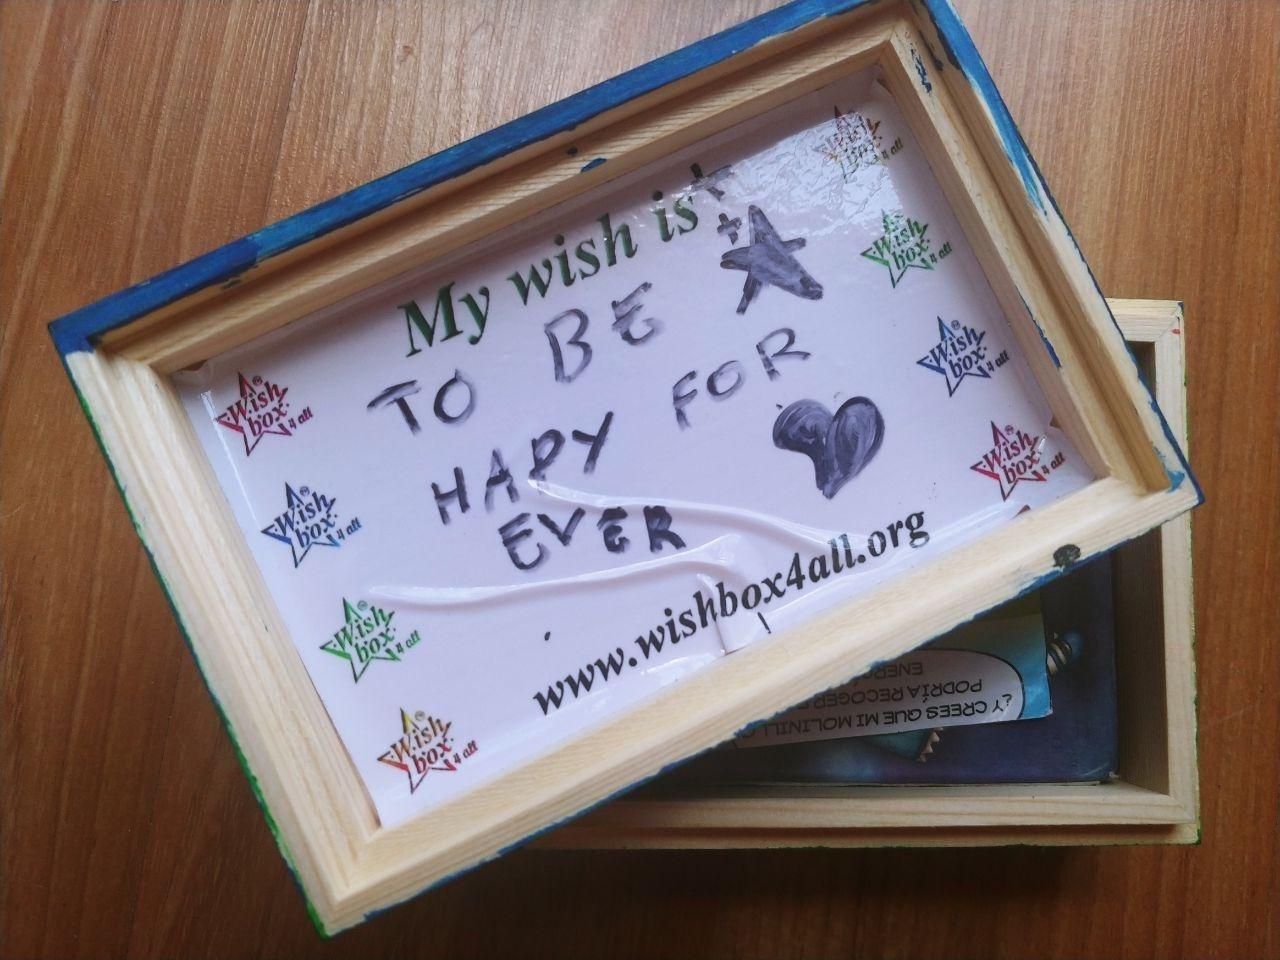 Focus on your dreams with the wishbox